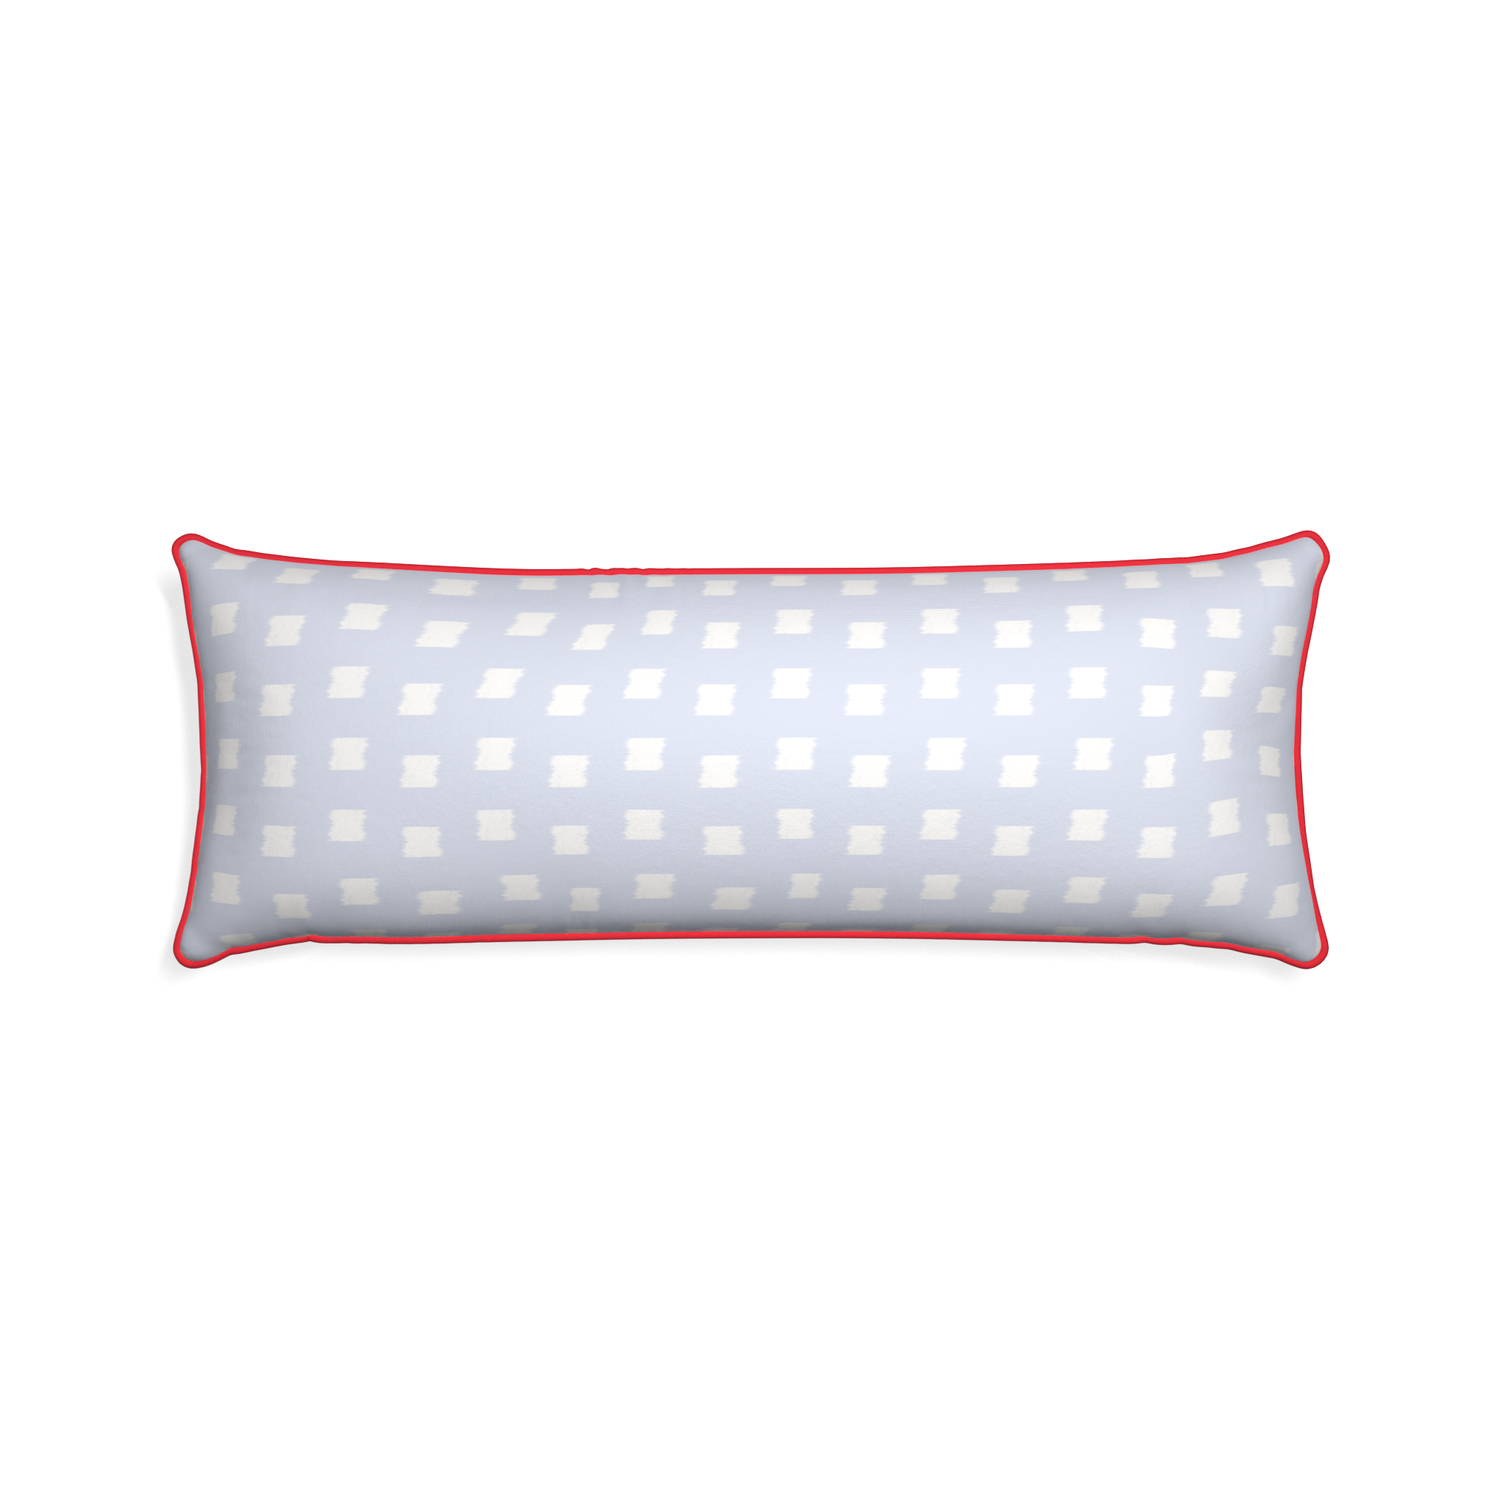 Xl-lumbar denton custom sky blue patternpillow with cherry piping on white background